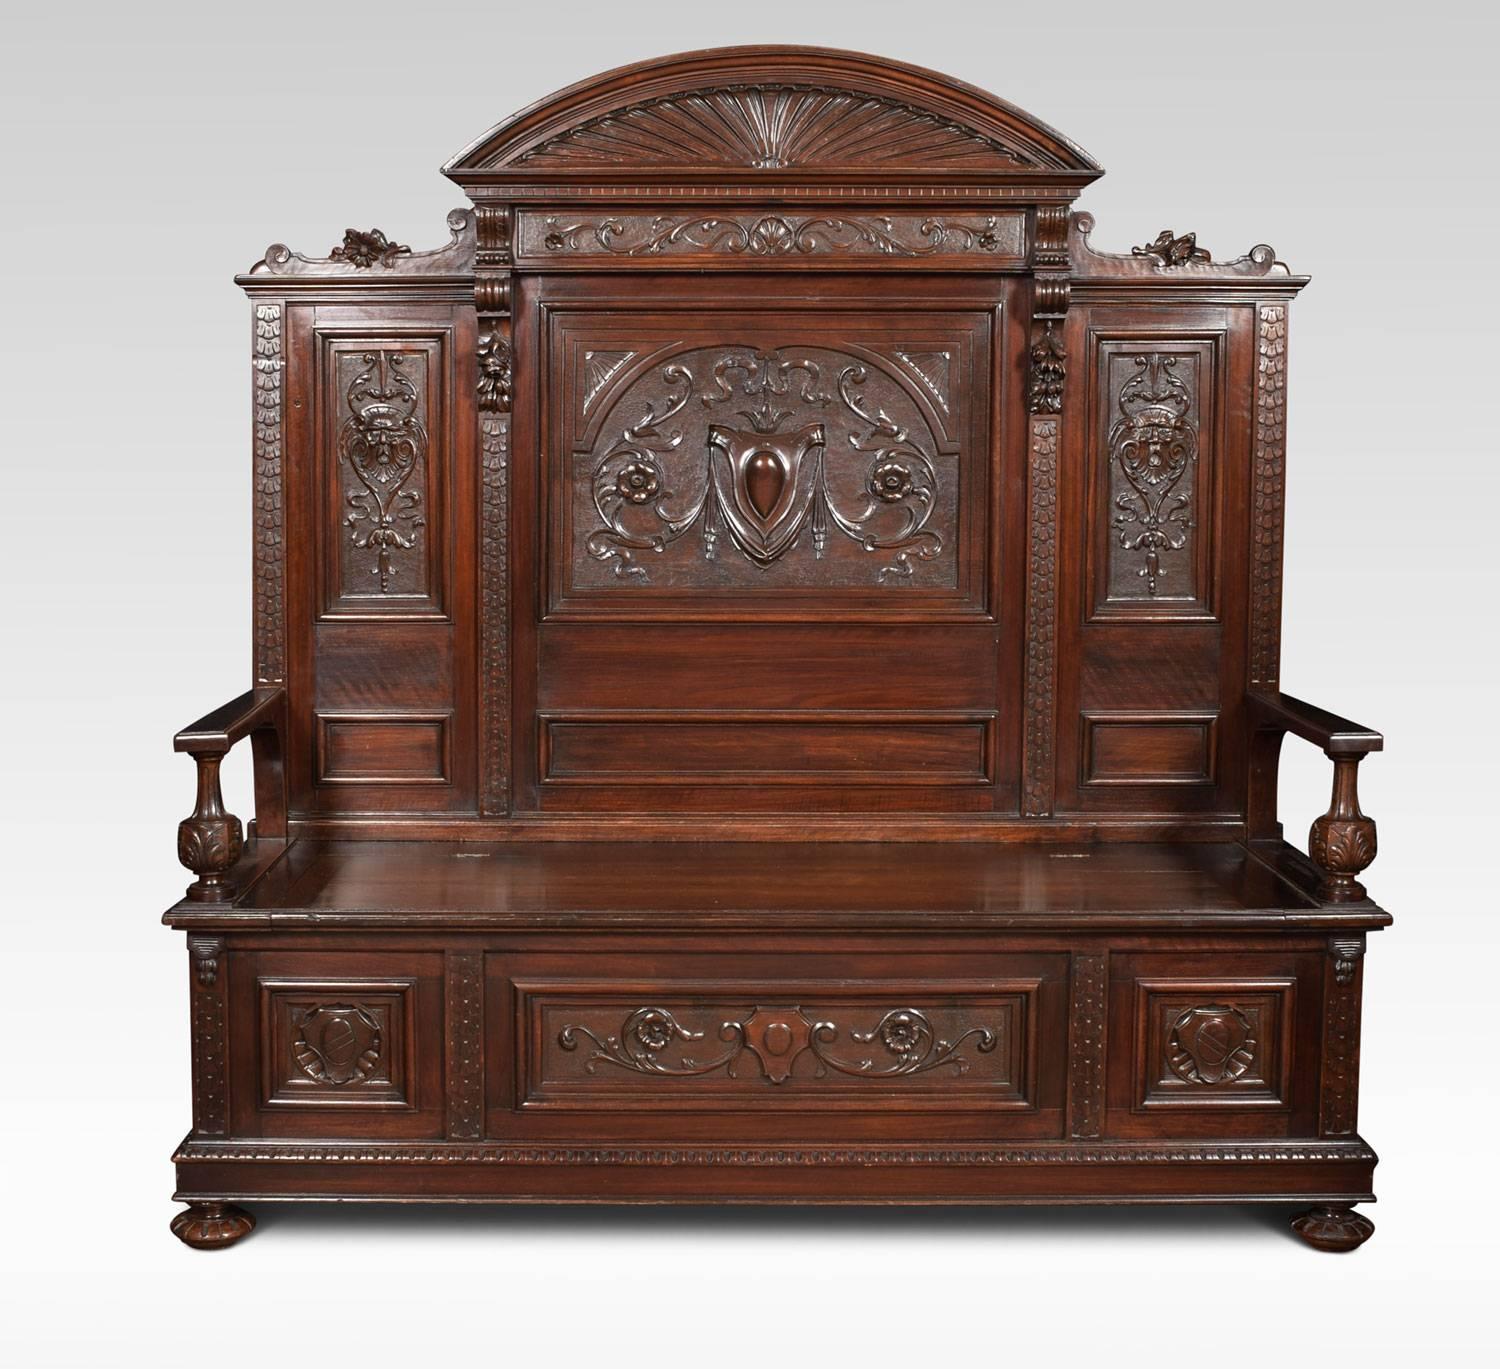 19th century hall settle, the carved walnut panelled high back with an arched and dentil carved cornice. To the seat with lift up lid flanked by moulded arms on leaf carved vase-shaped front pillars. The base with three carved frieze panels all